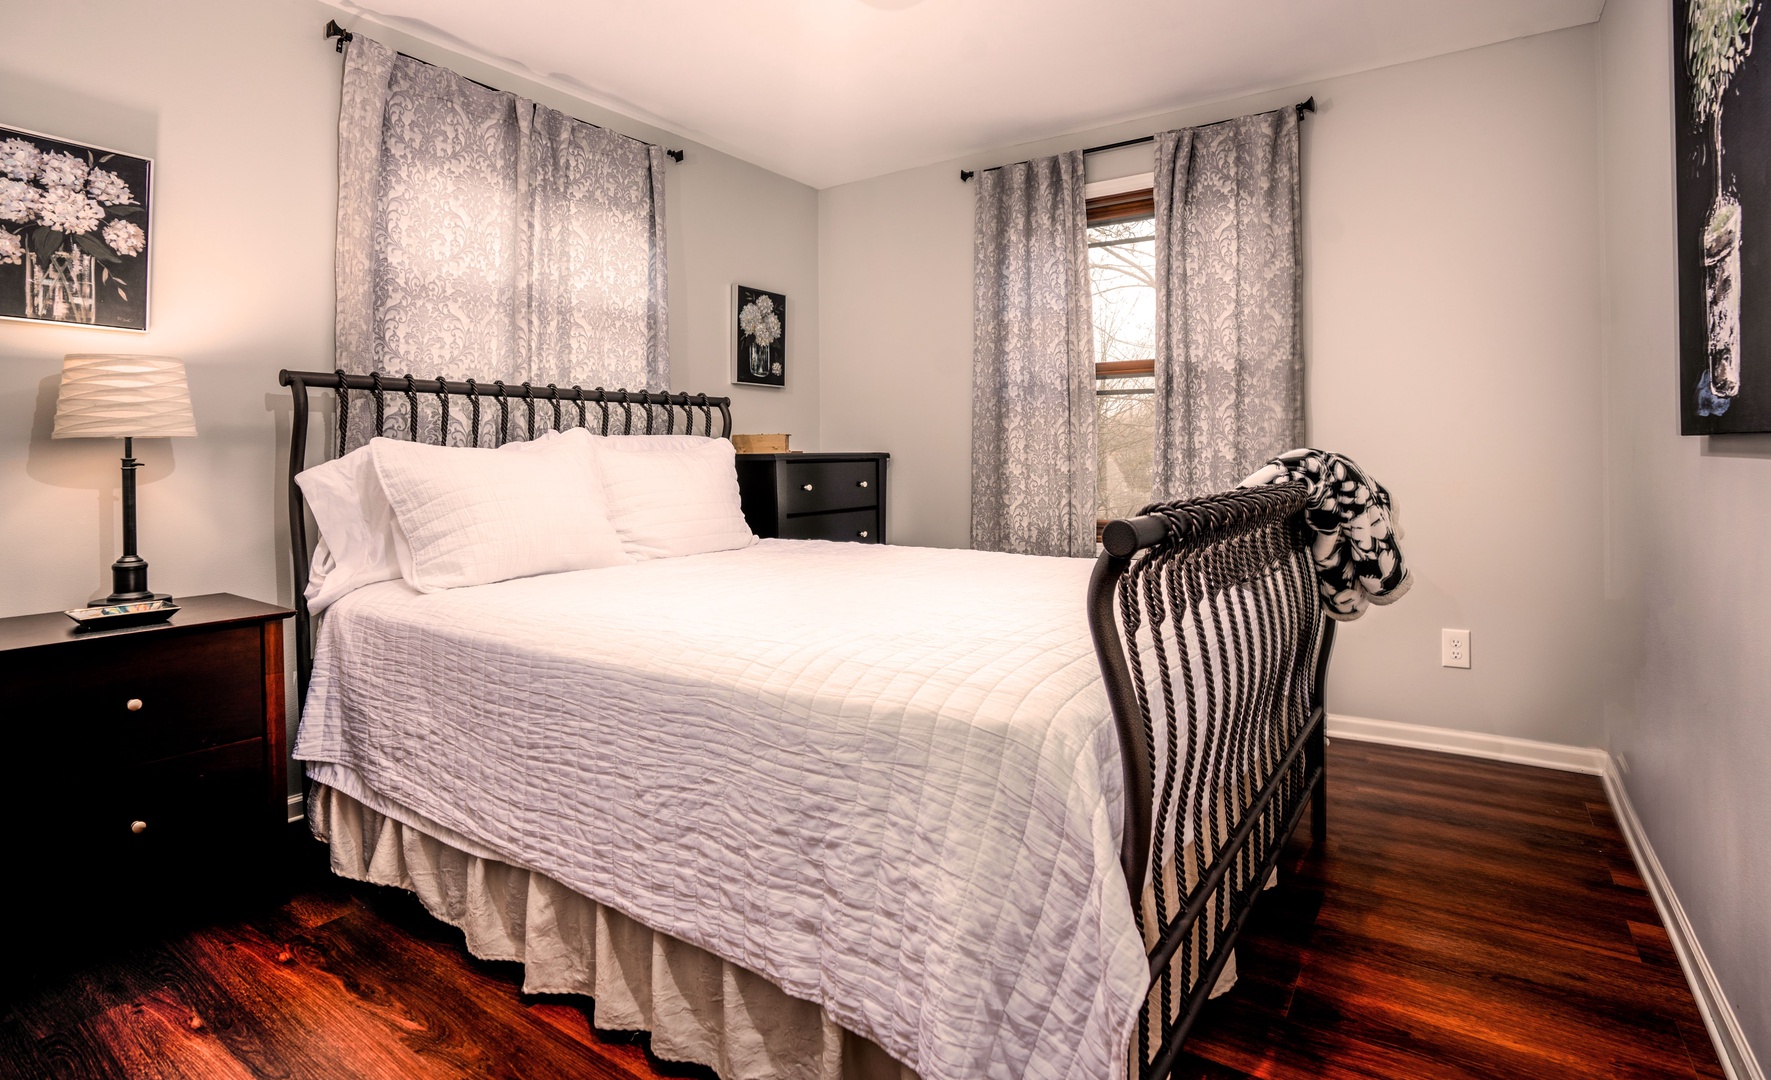 The final main-level bedroom offers a regal queen-sized bed